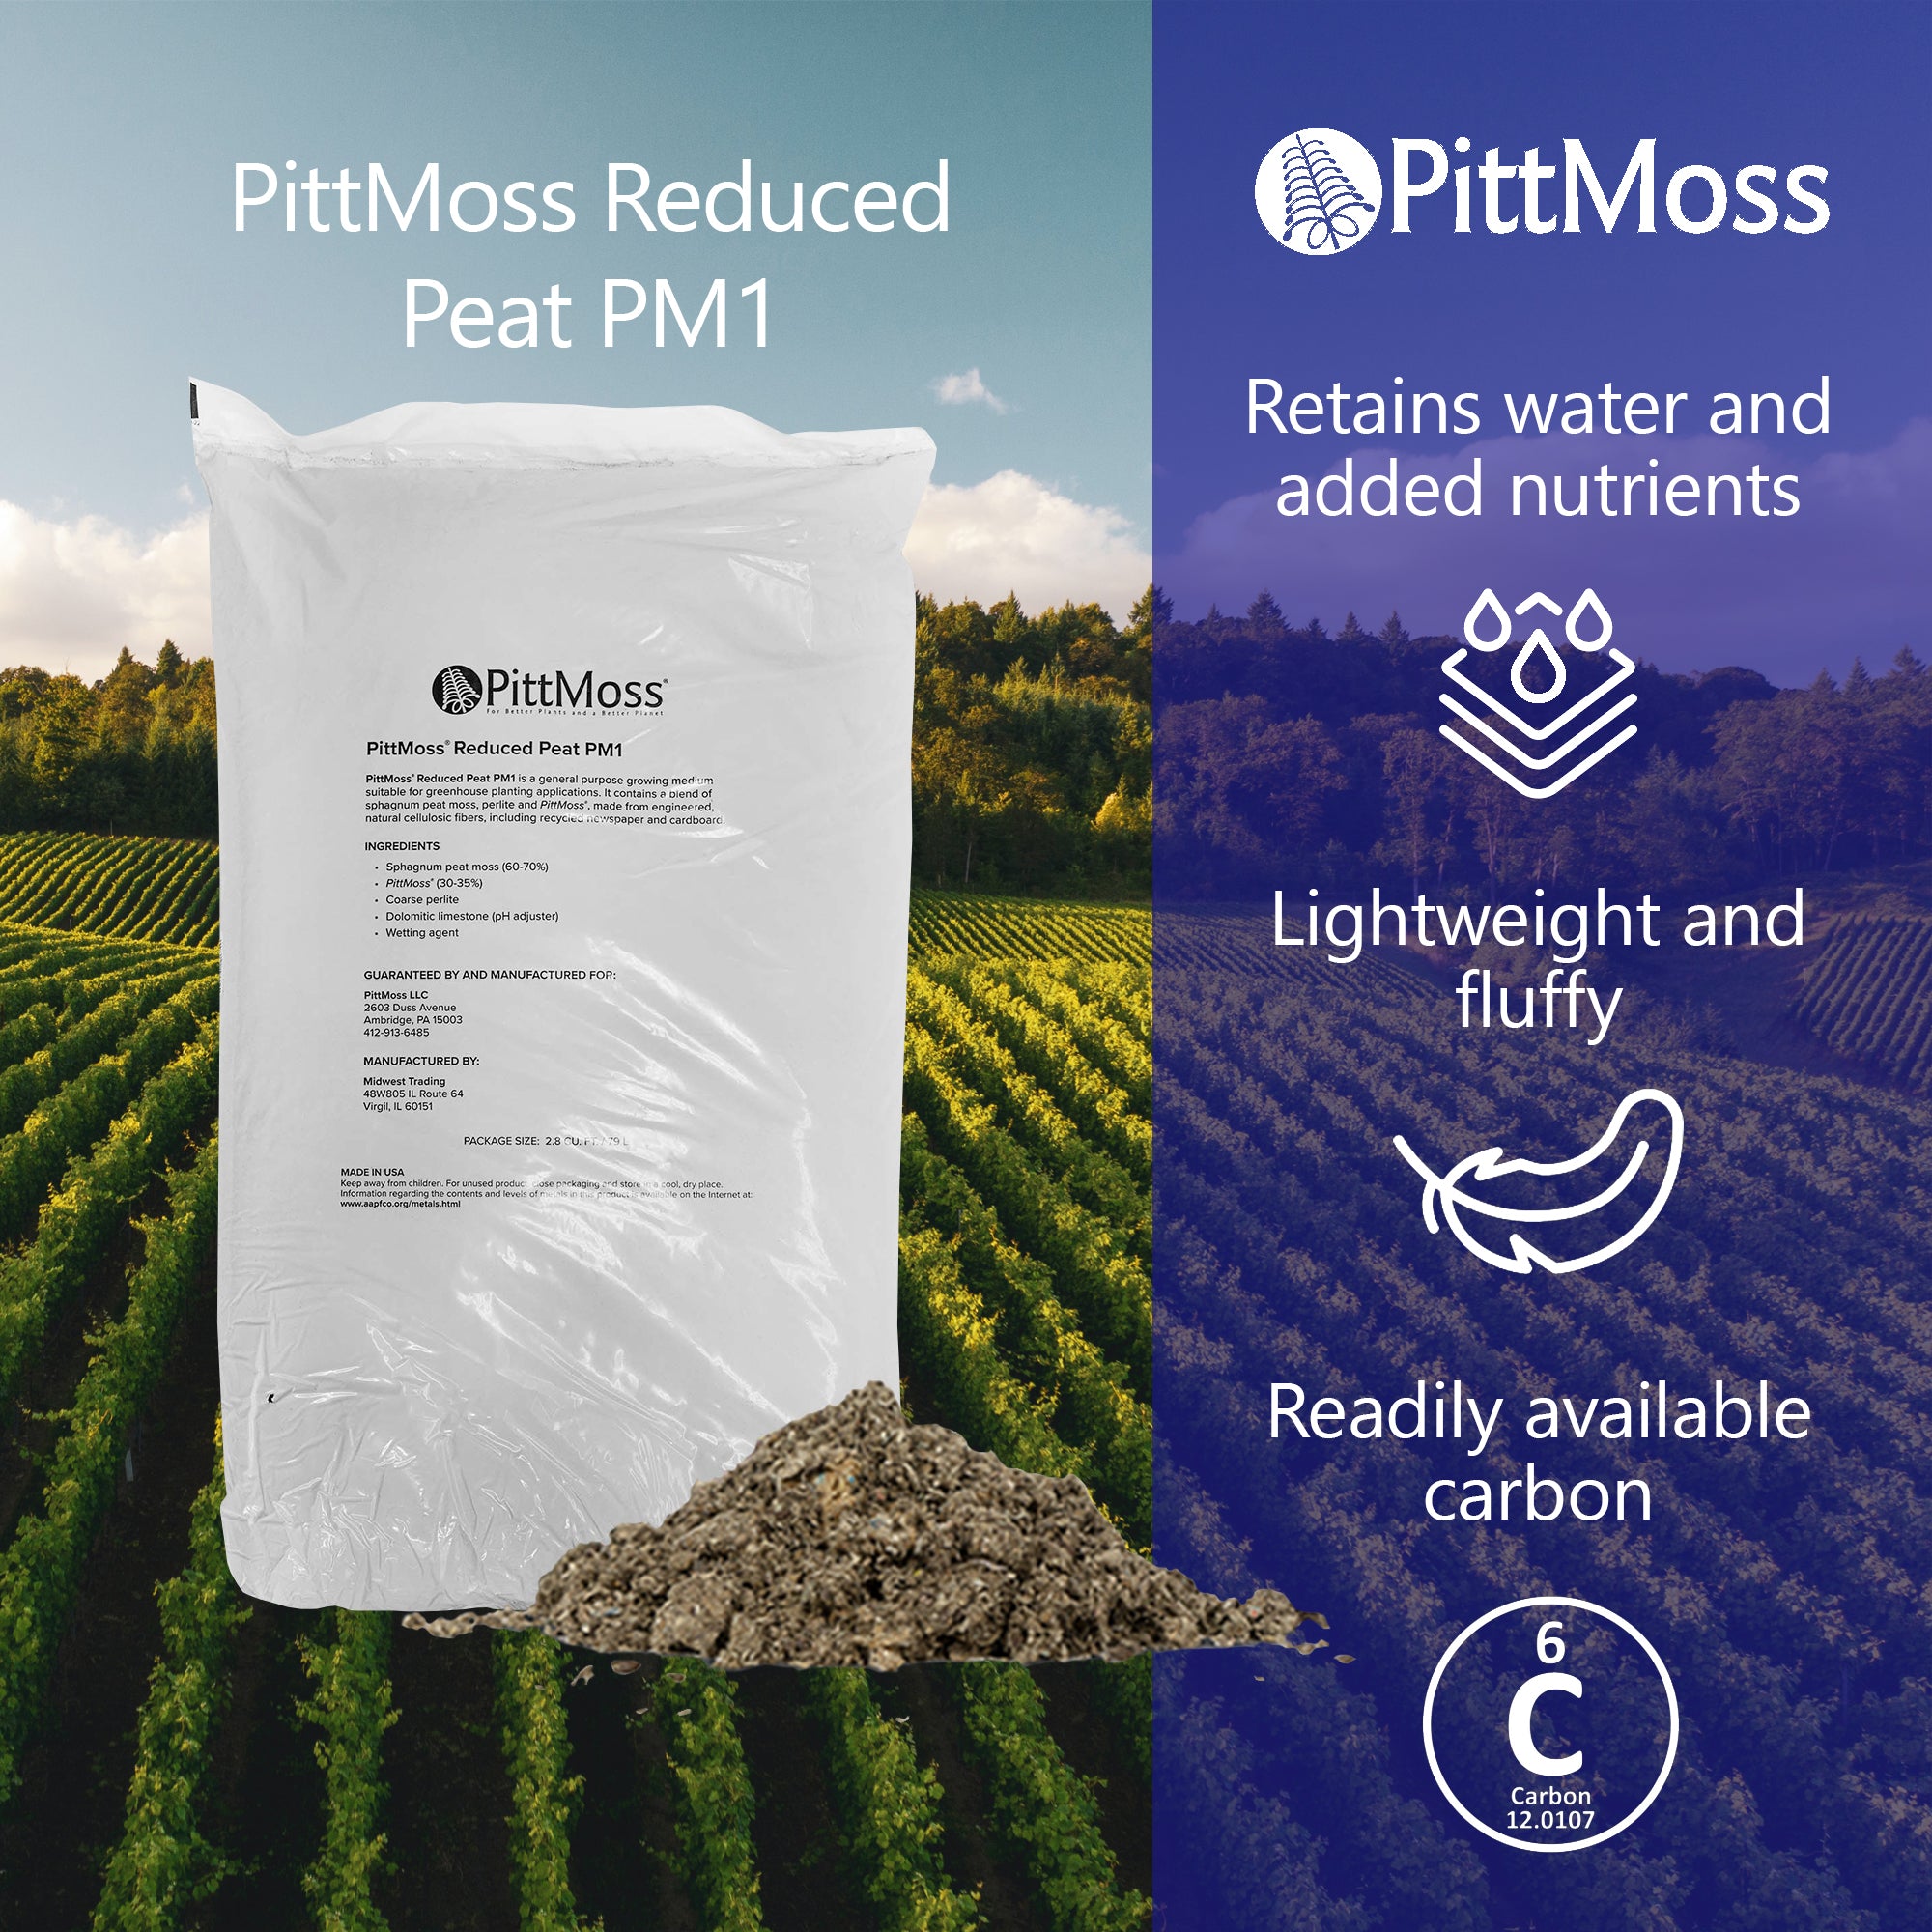 PittMoss PM1 Peat Reduced Professional Growing Mix with Sphagnum Peat and Perlite, 2.8 cu ft